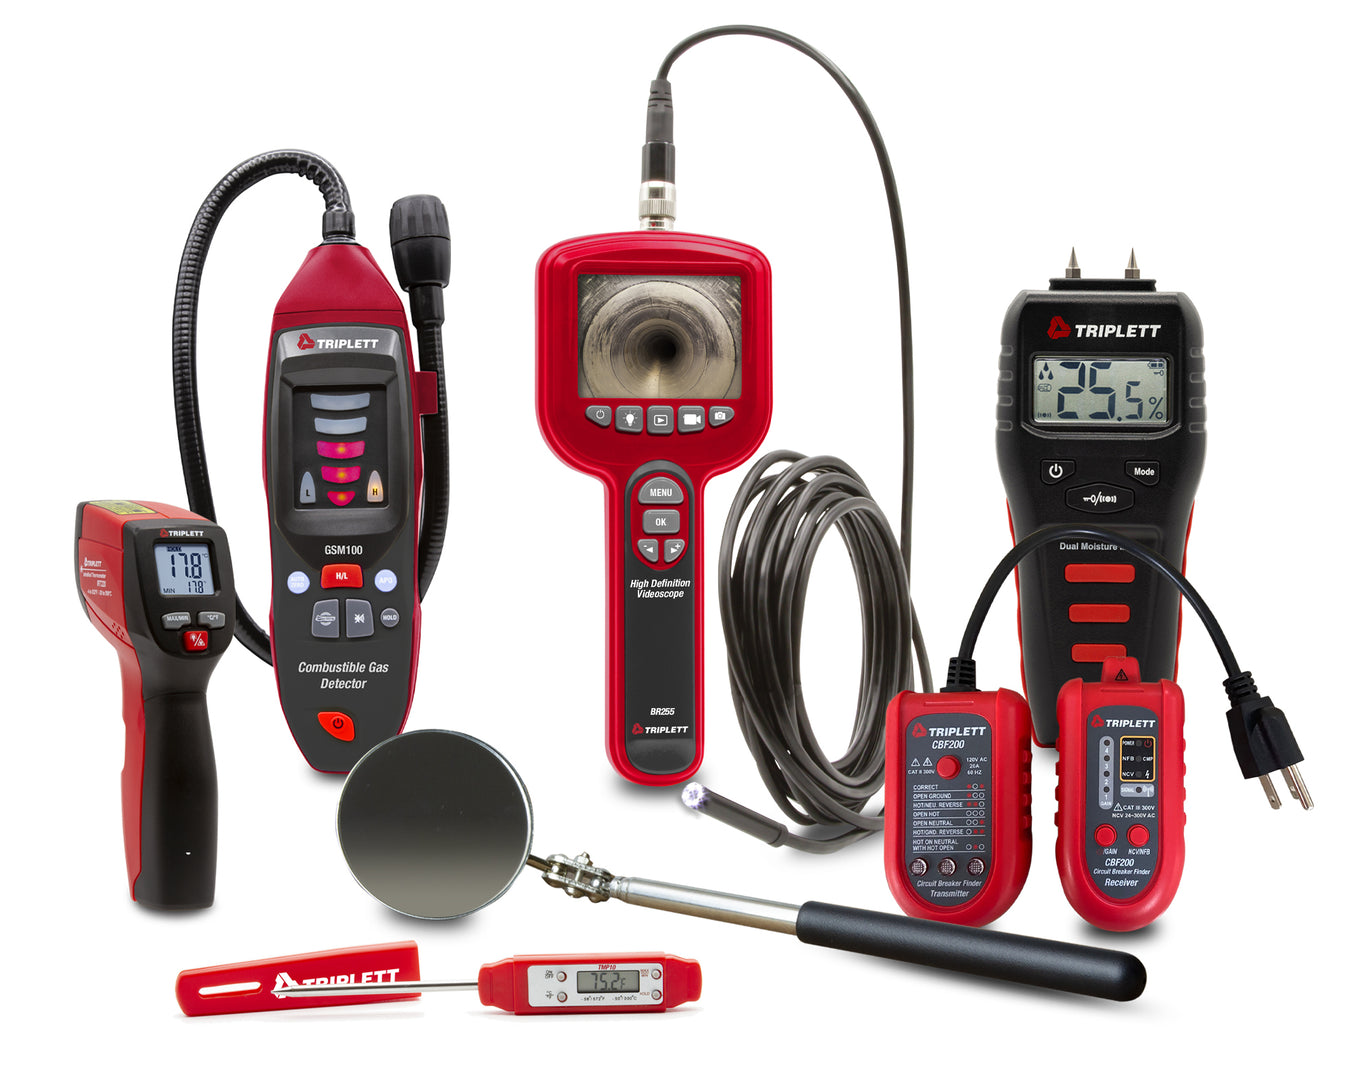 Special Tool Kits for Home Inspection and Professional Electrician